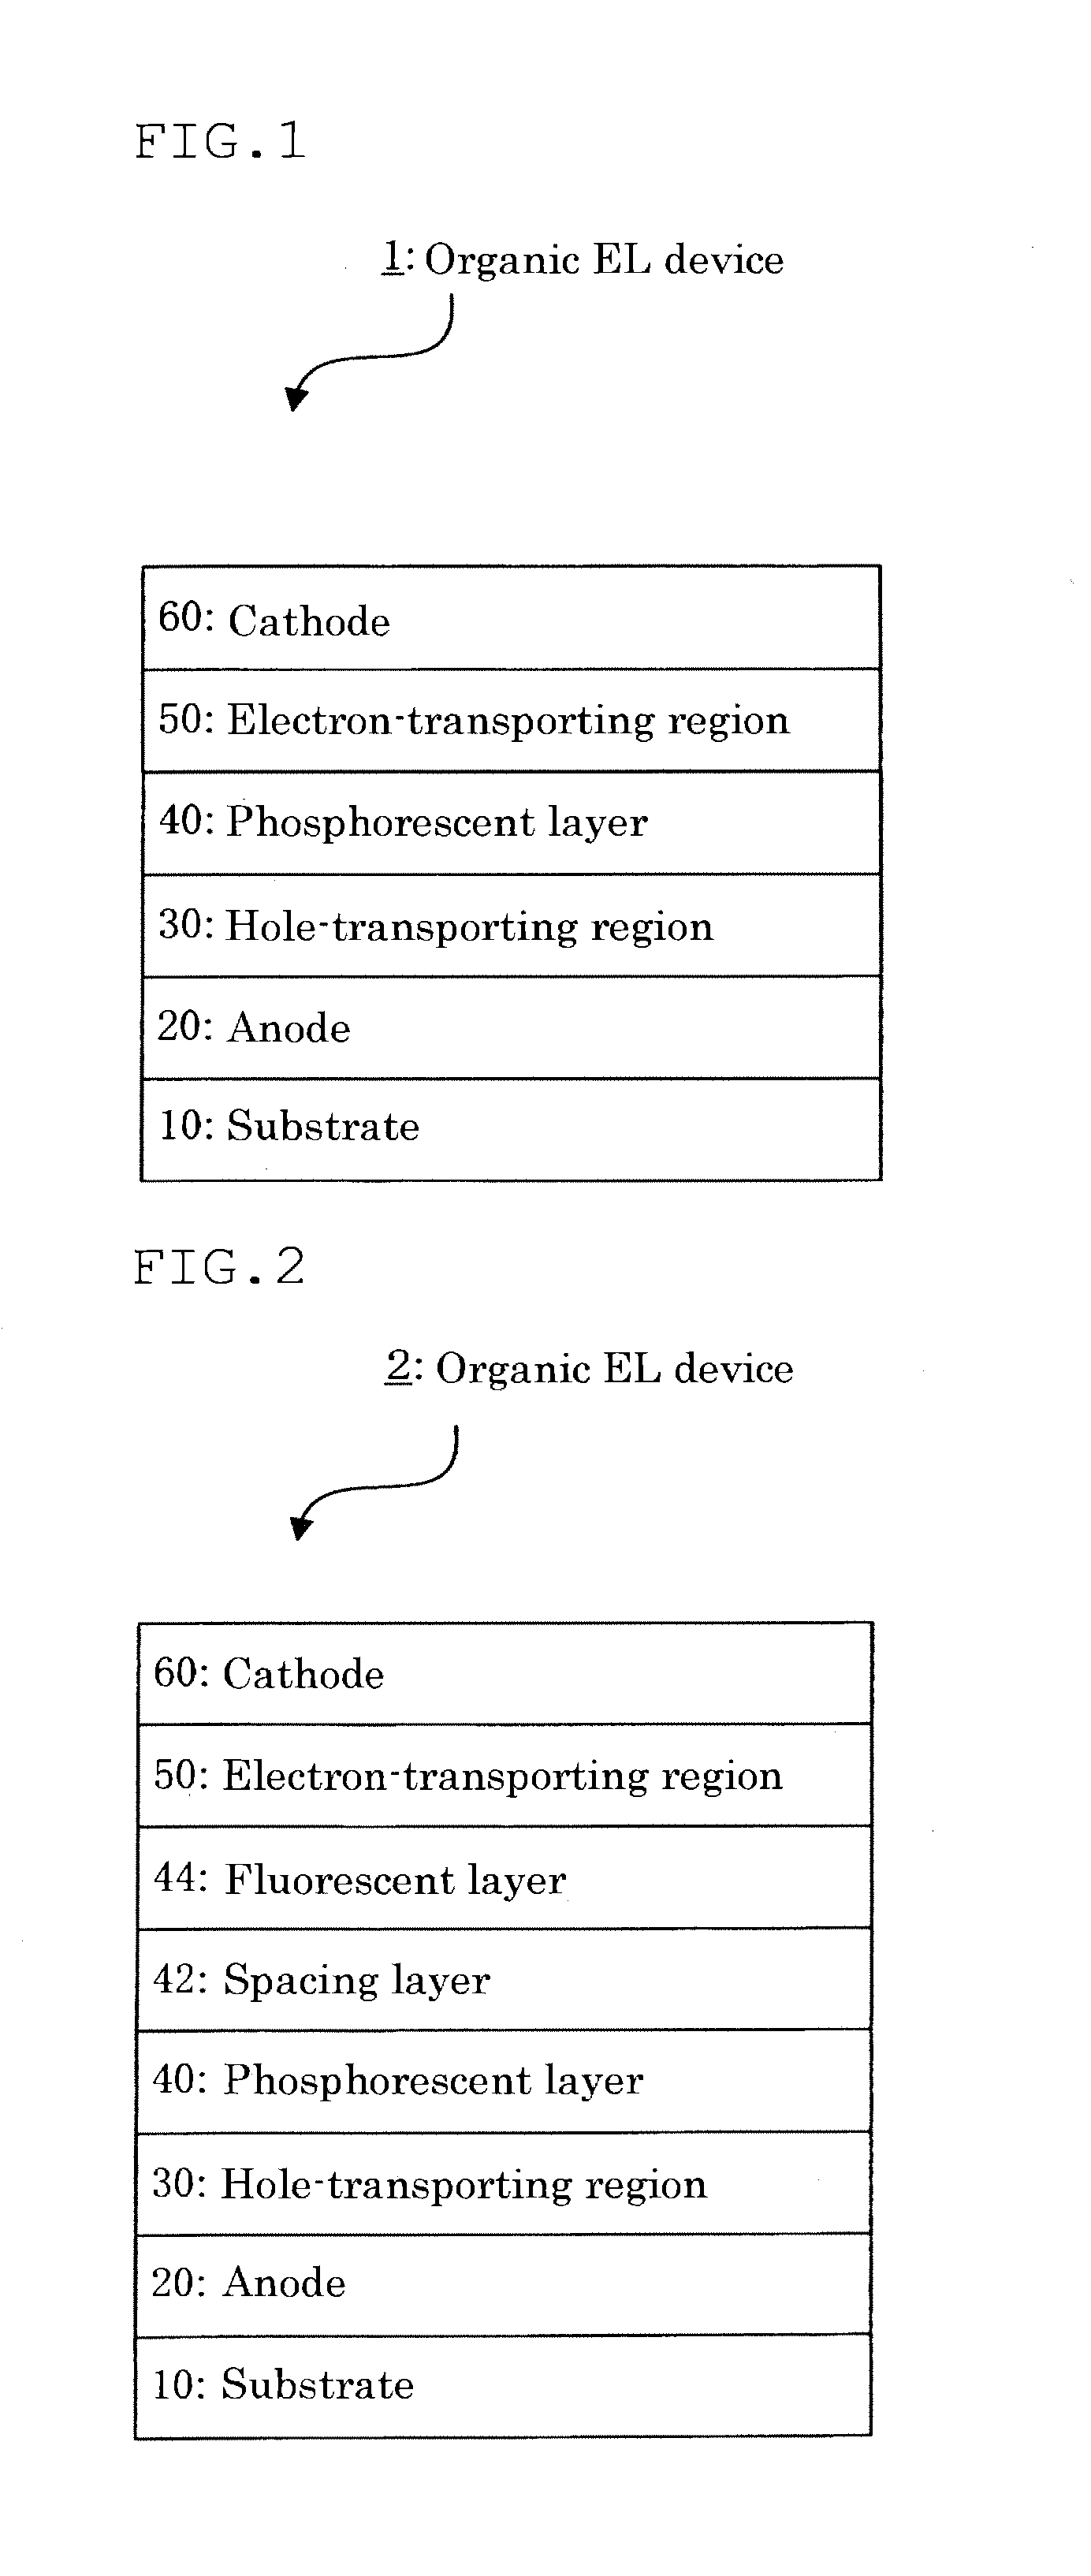 Material for organic electroluminescent element, and organic electroluminescent element produced using same